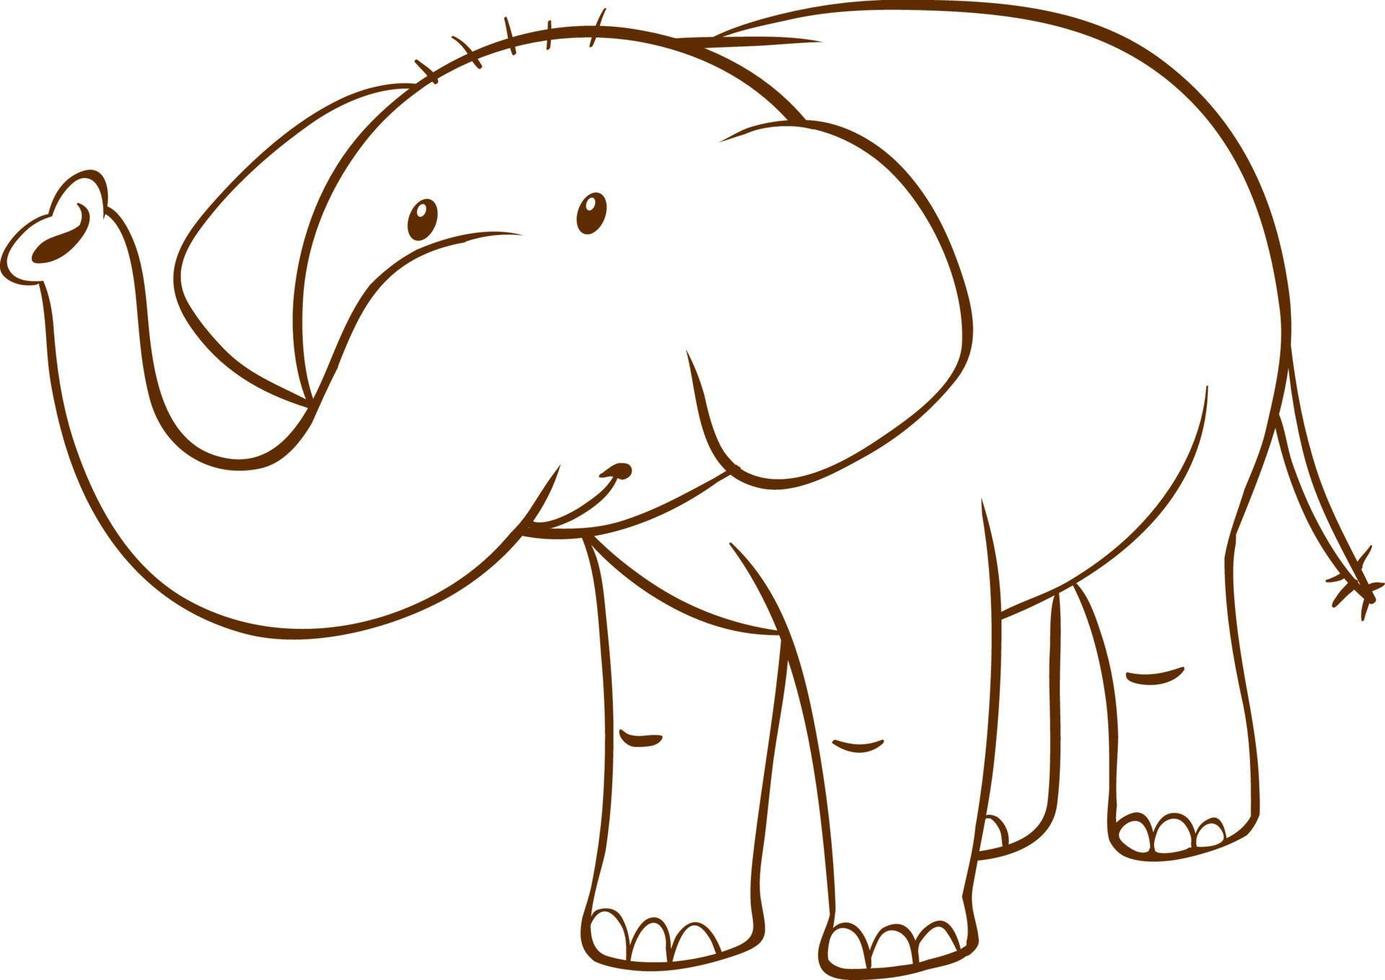 Elephant in doodle simple style on white background vector